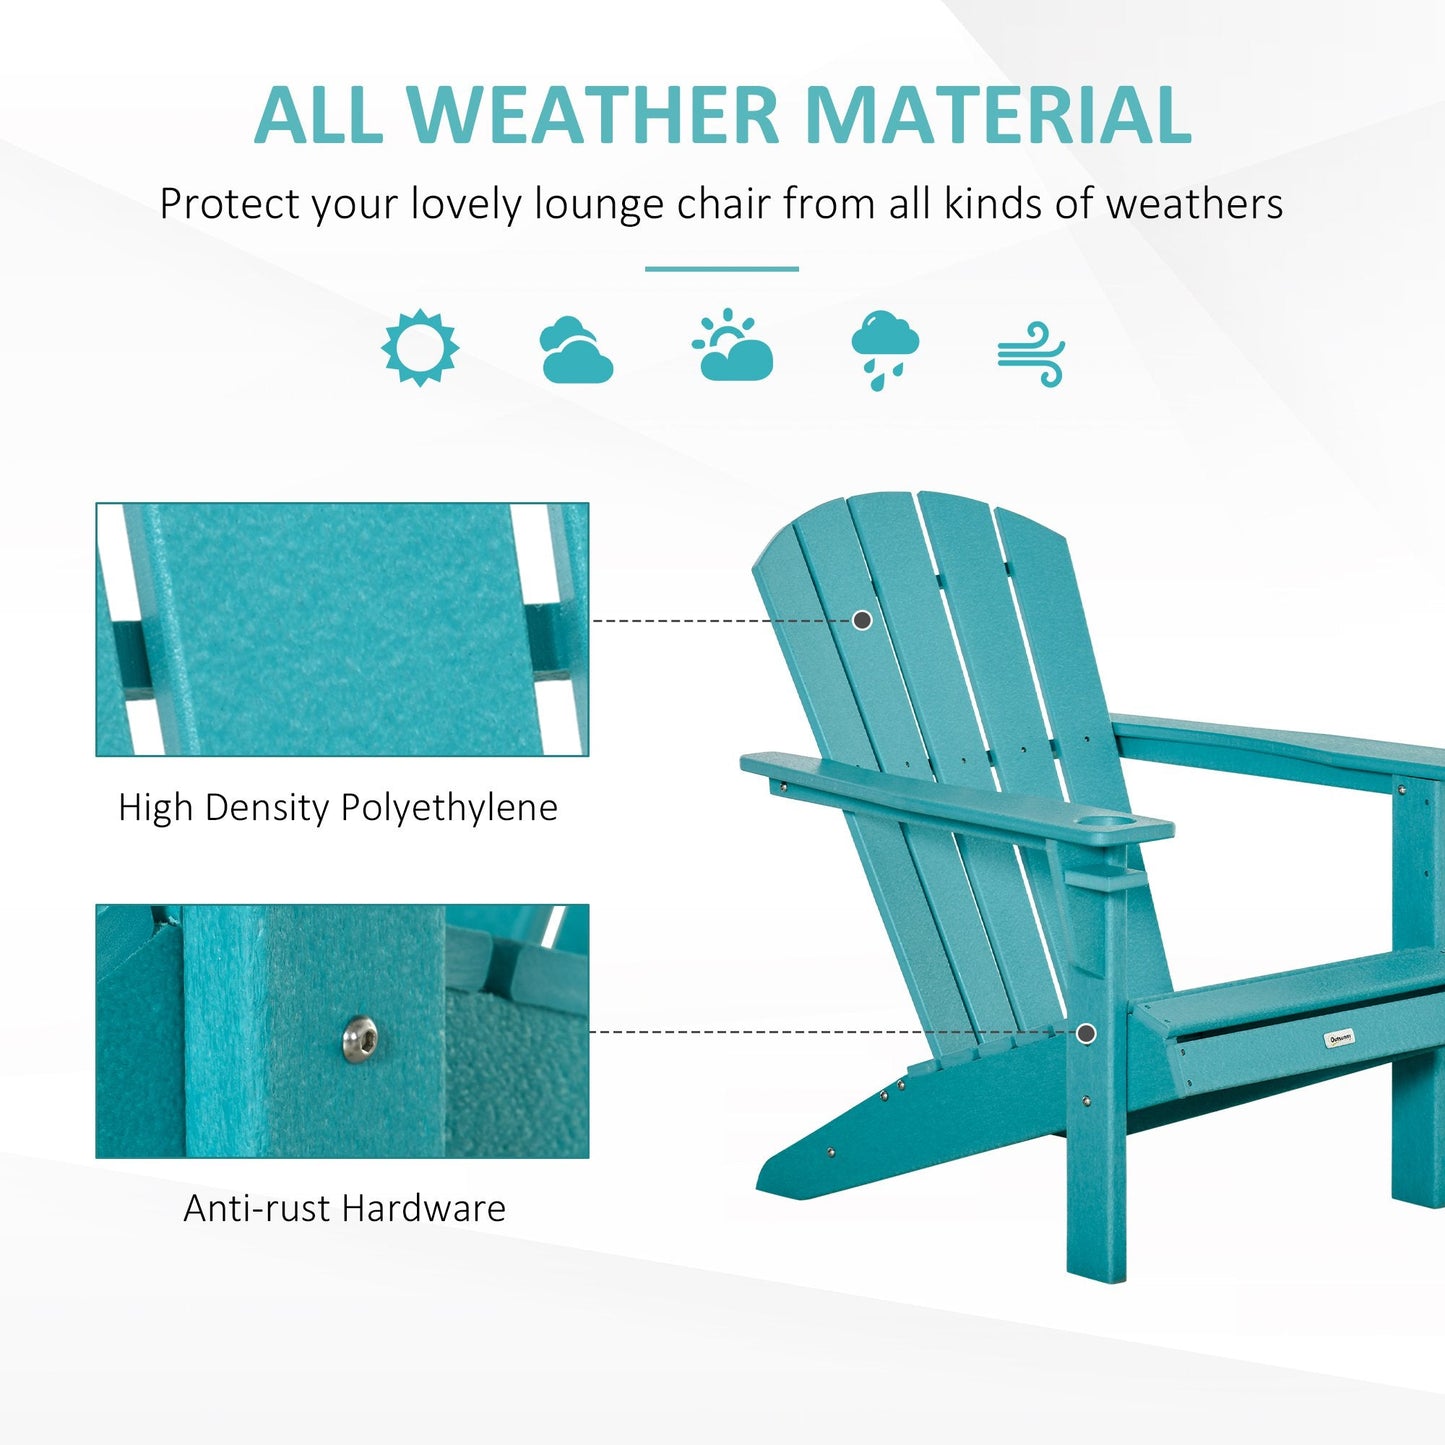 Outdoor and Garden-Outdoor HDPE Adirondack Deck Chair, Plastic Lounger with Cup Holder, High Back and Wide Seat, Turquoise - Outdoor Style Company